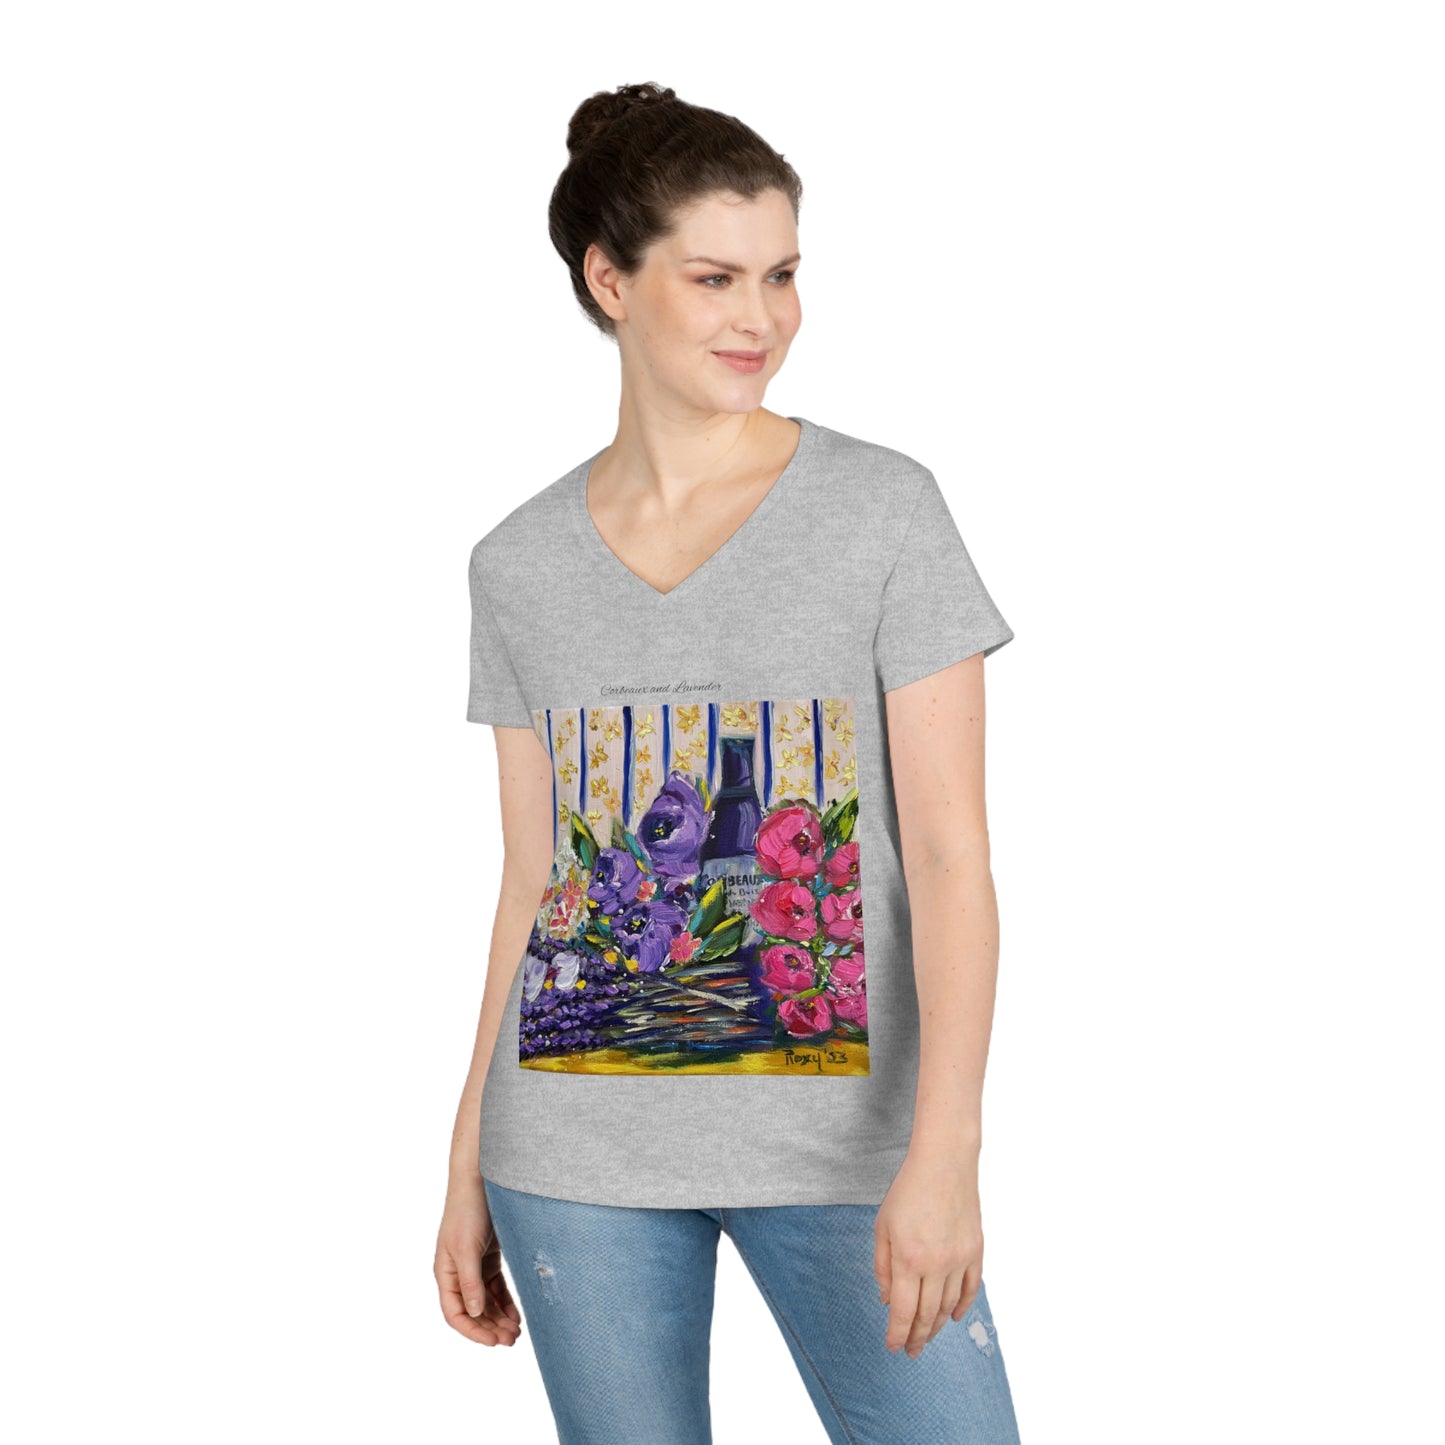 Corbeaux and Lavender Ladies' V-Neck T-Shirt